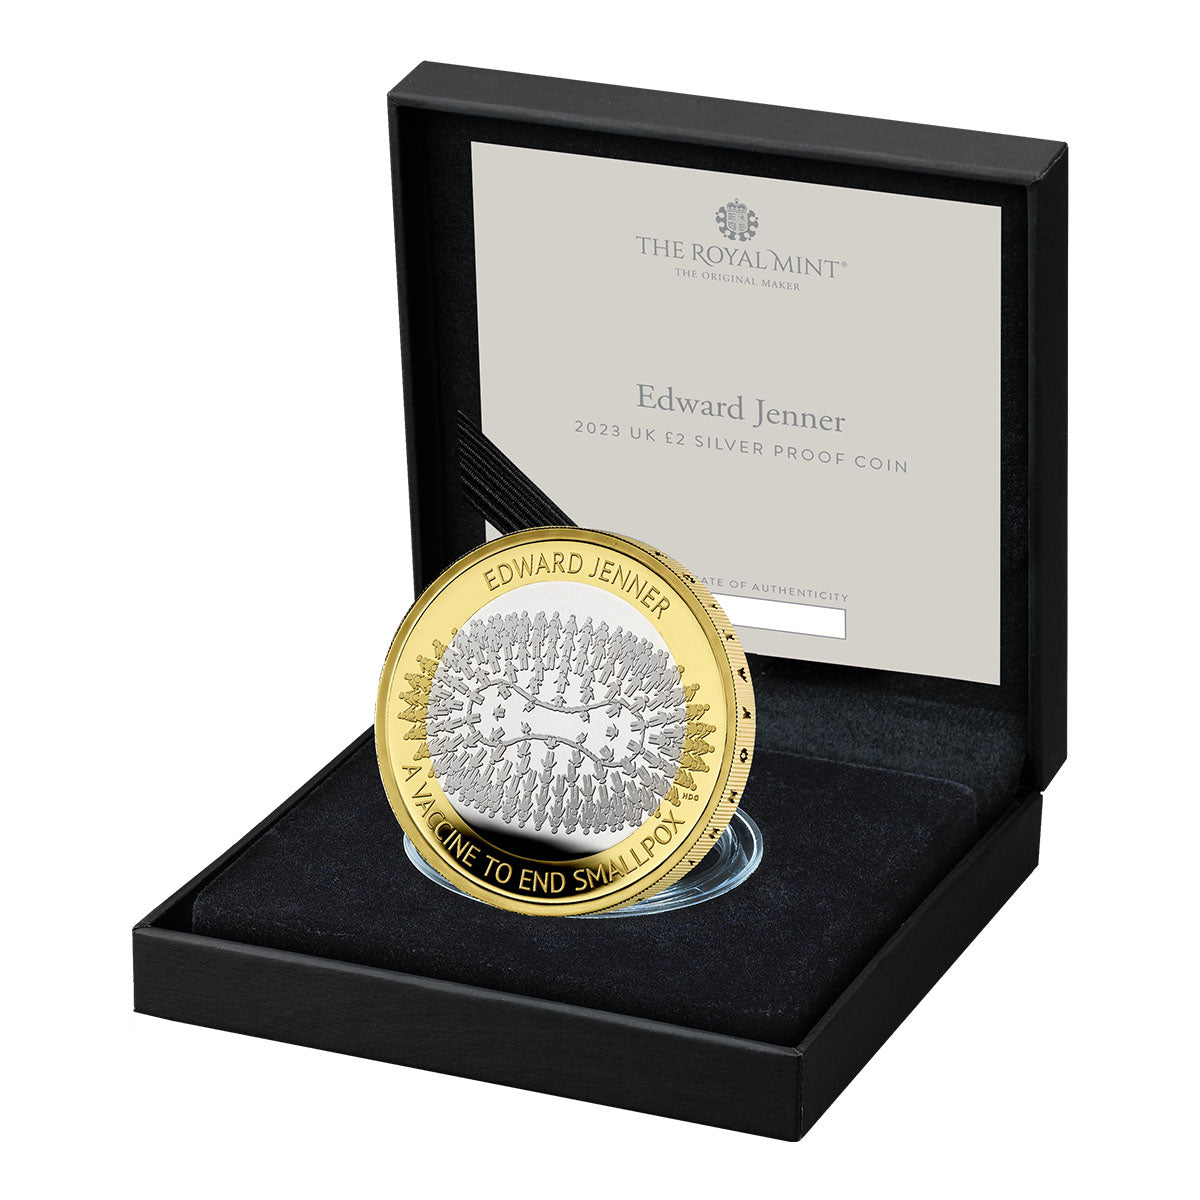 Edward Jenner 2023 £2 Silver Proof Coin